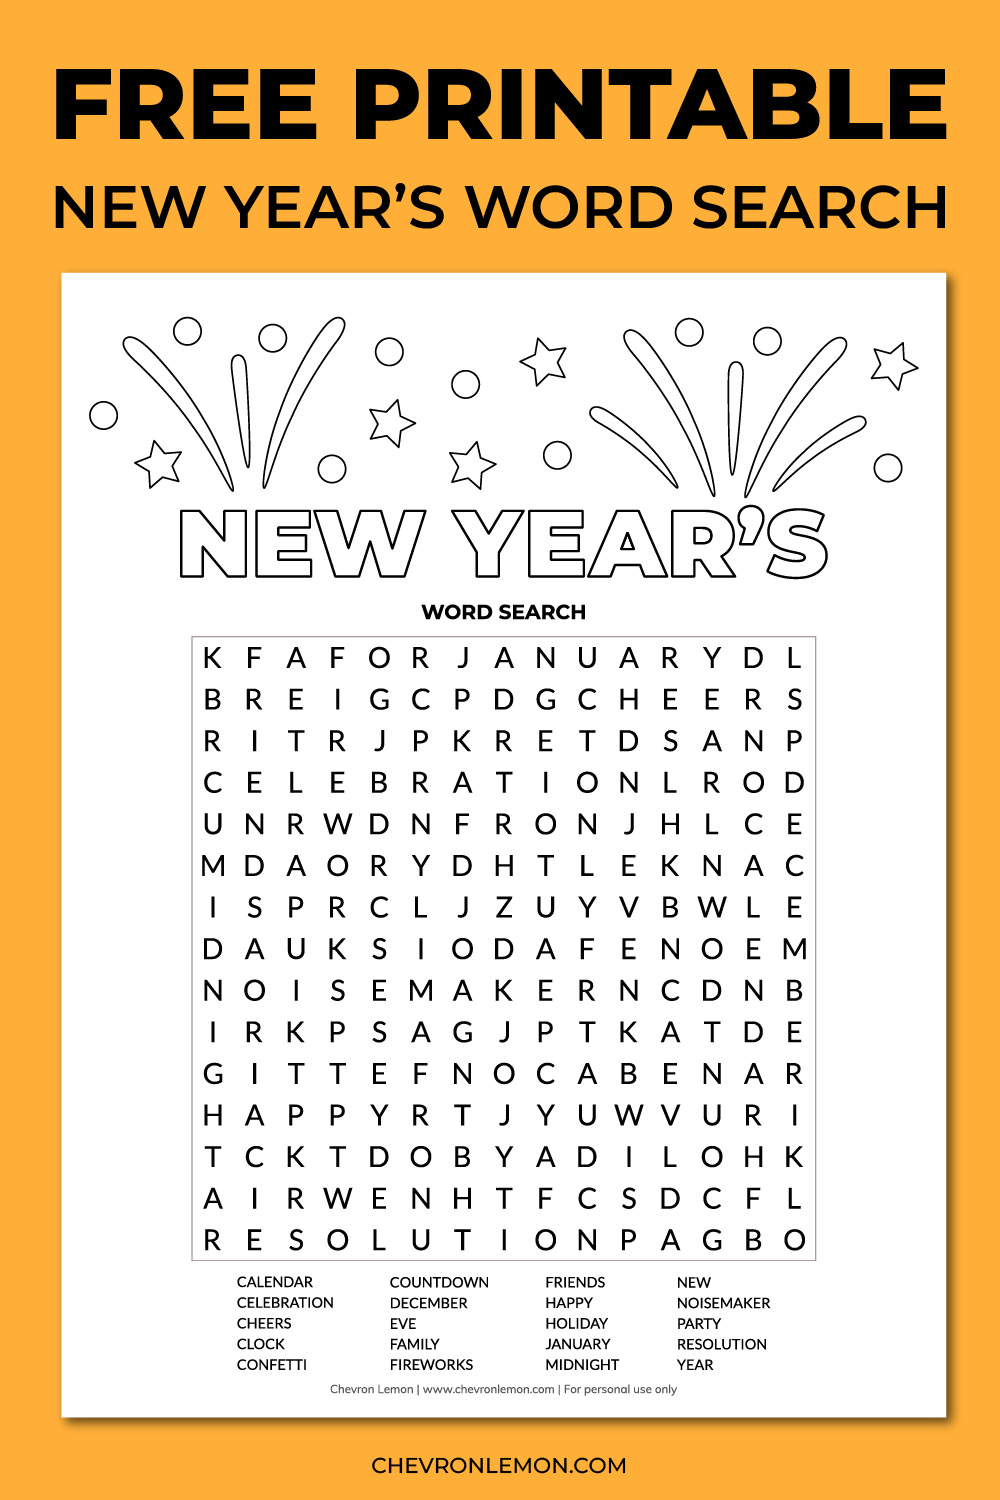 Printable New Year's word search